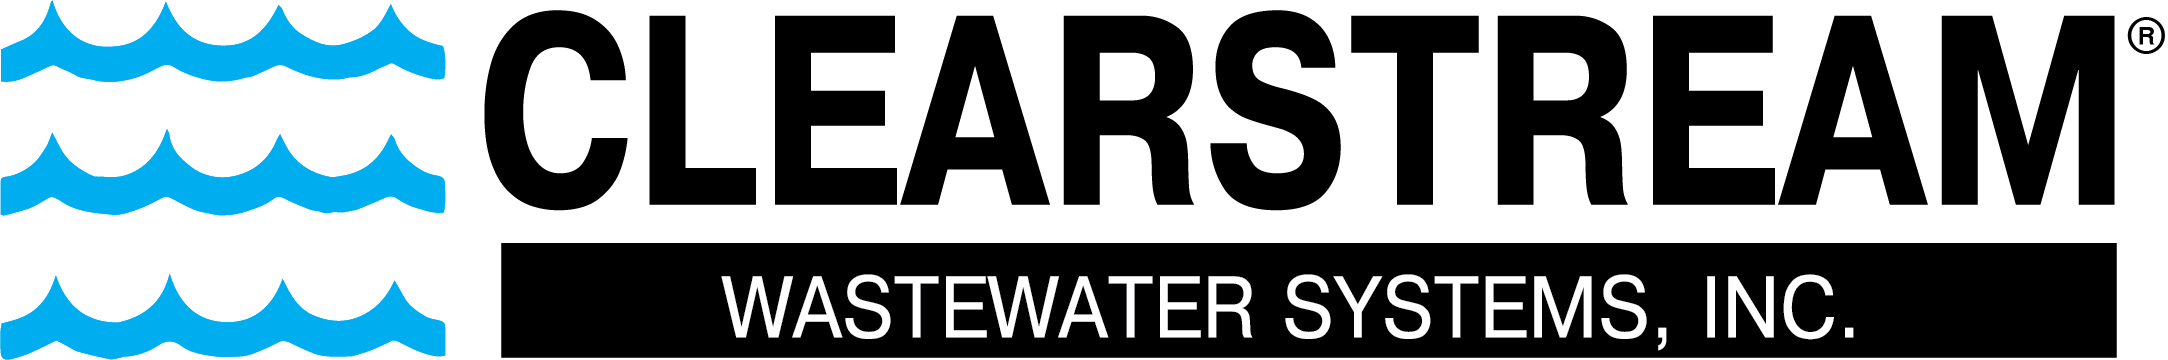 Clearstream Wastewater Systems Logo